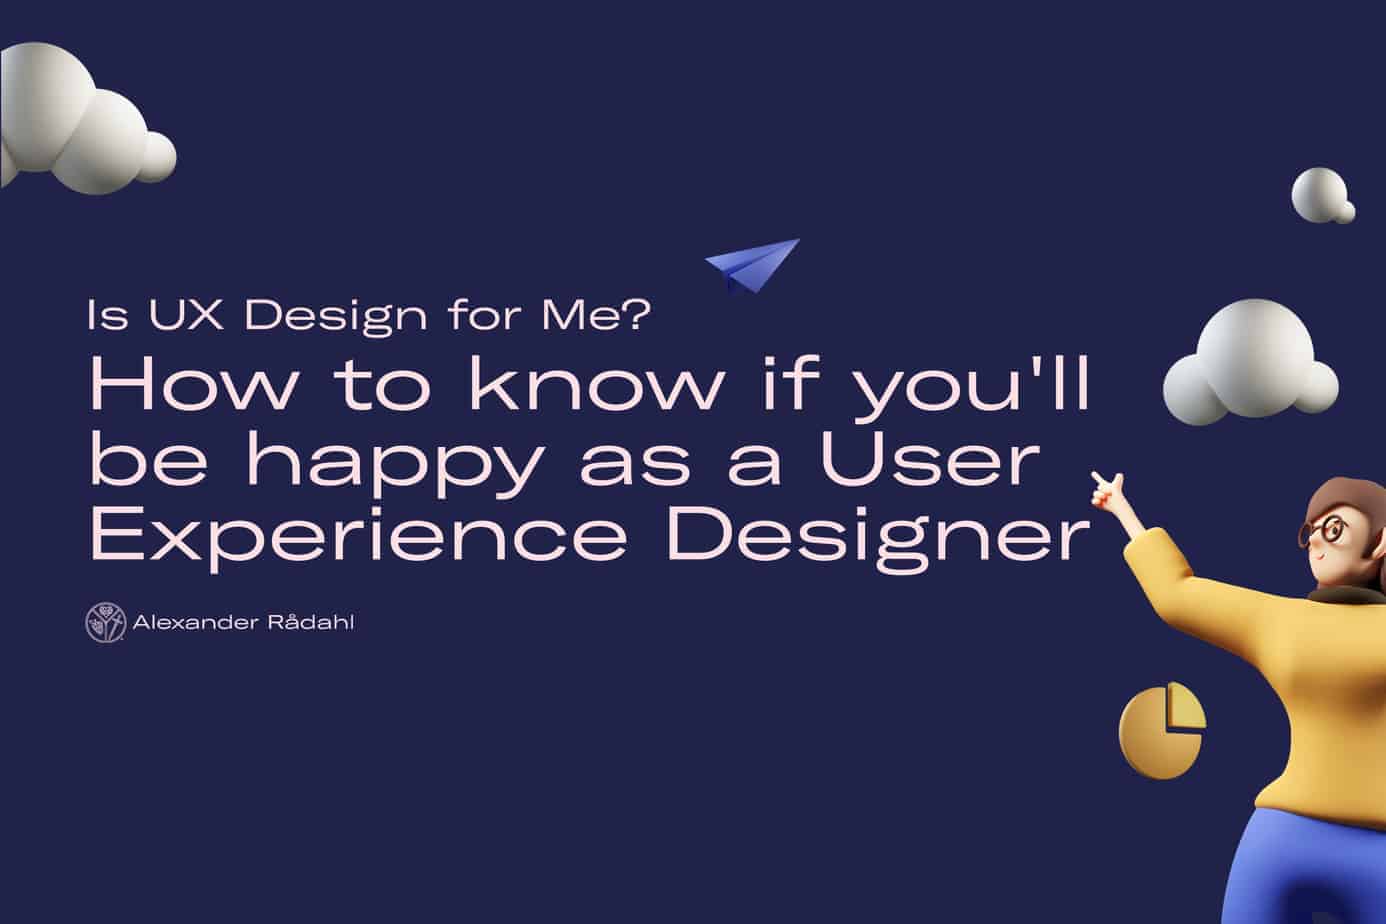 Is ux design for me? How to know if you’ll be happy as a user experience designer